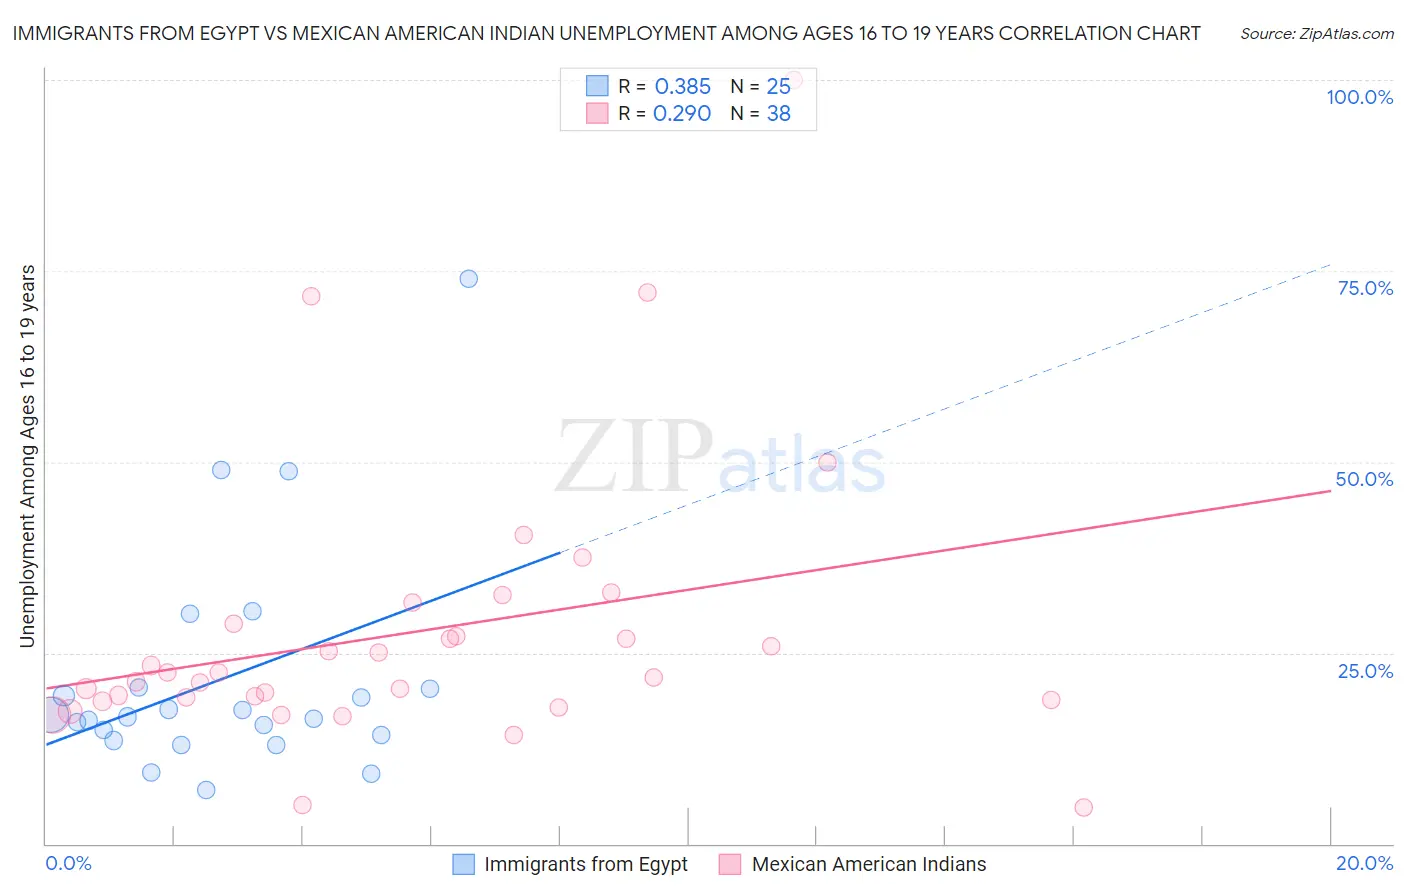 Immigrants from Egypt vs Mexican American Indian Unemployment Among Ages 16 to 19 years